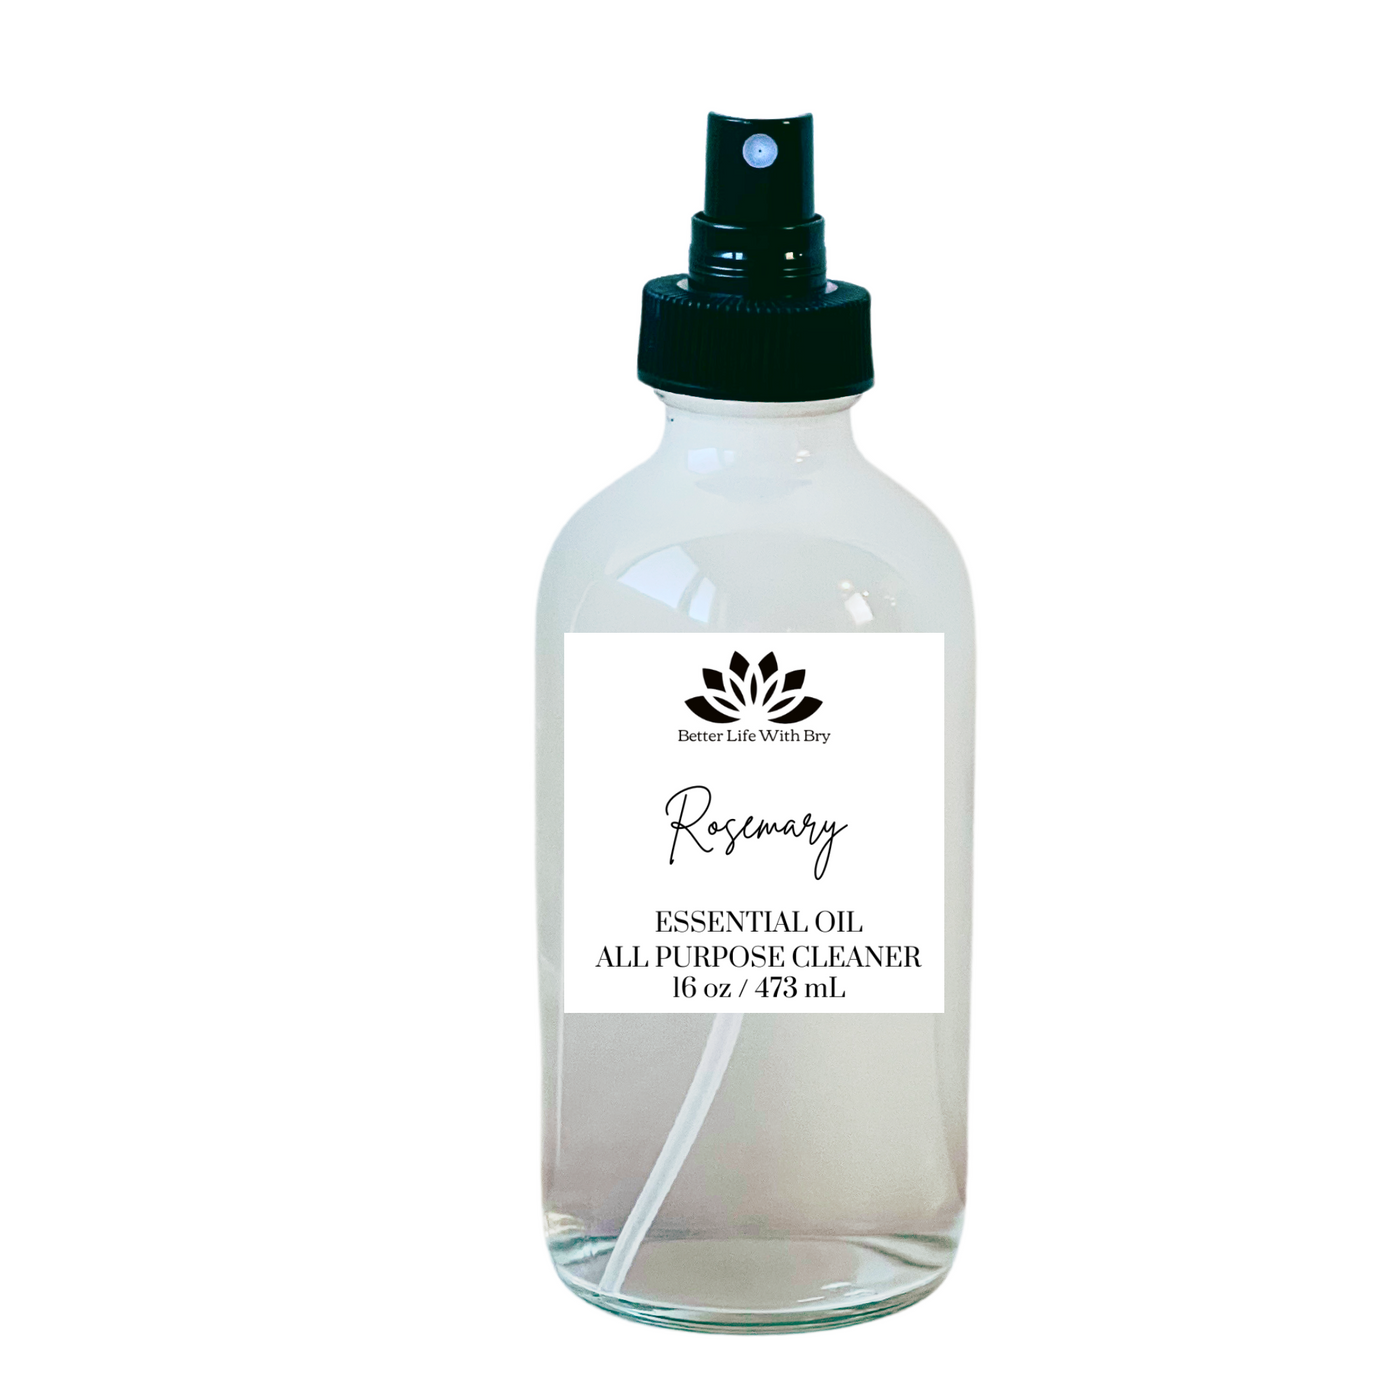 Rosemary Essential Oil All Purpose Cleaner